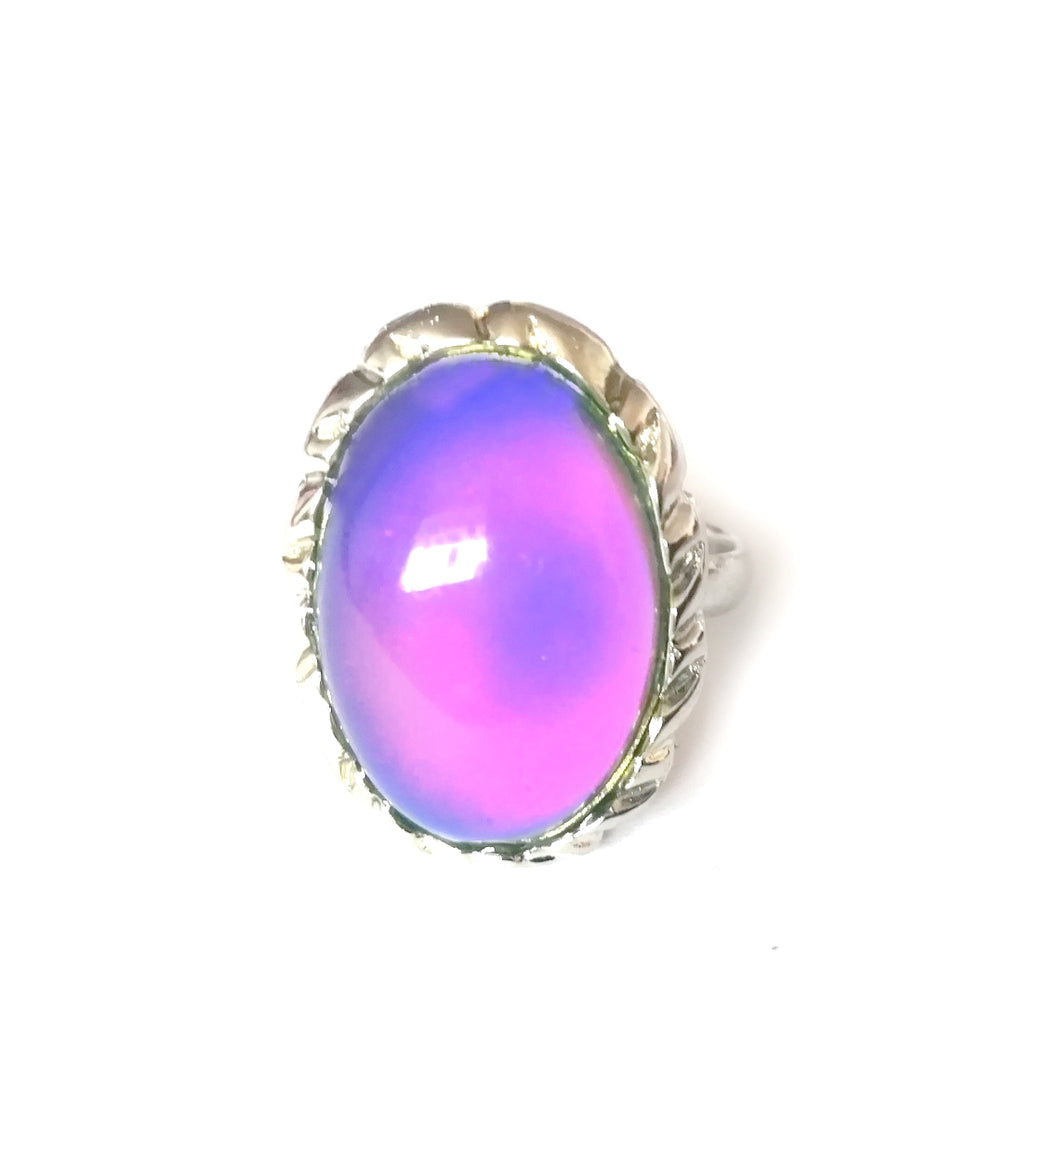 a mood ring with an oval shape and purple color mood meaning